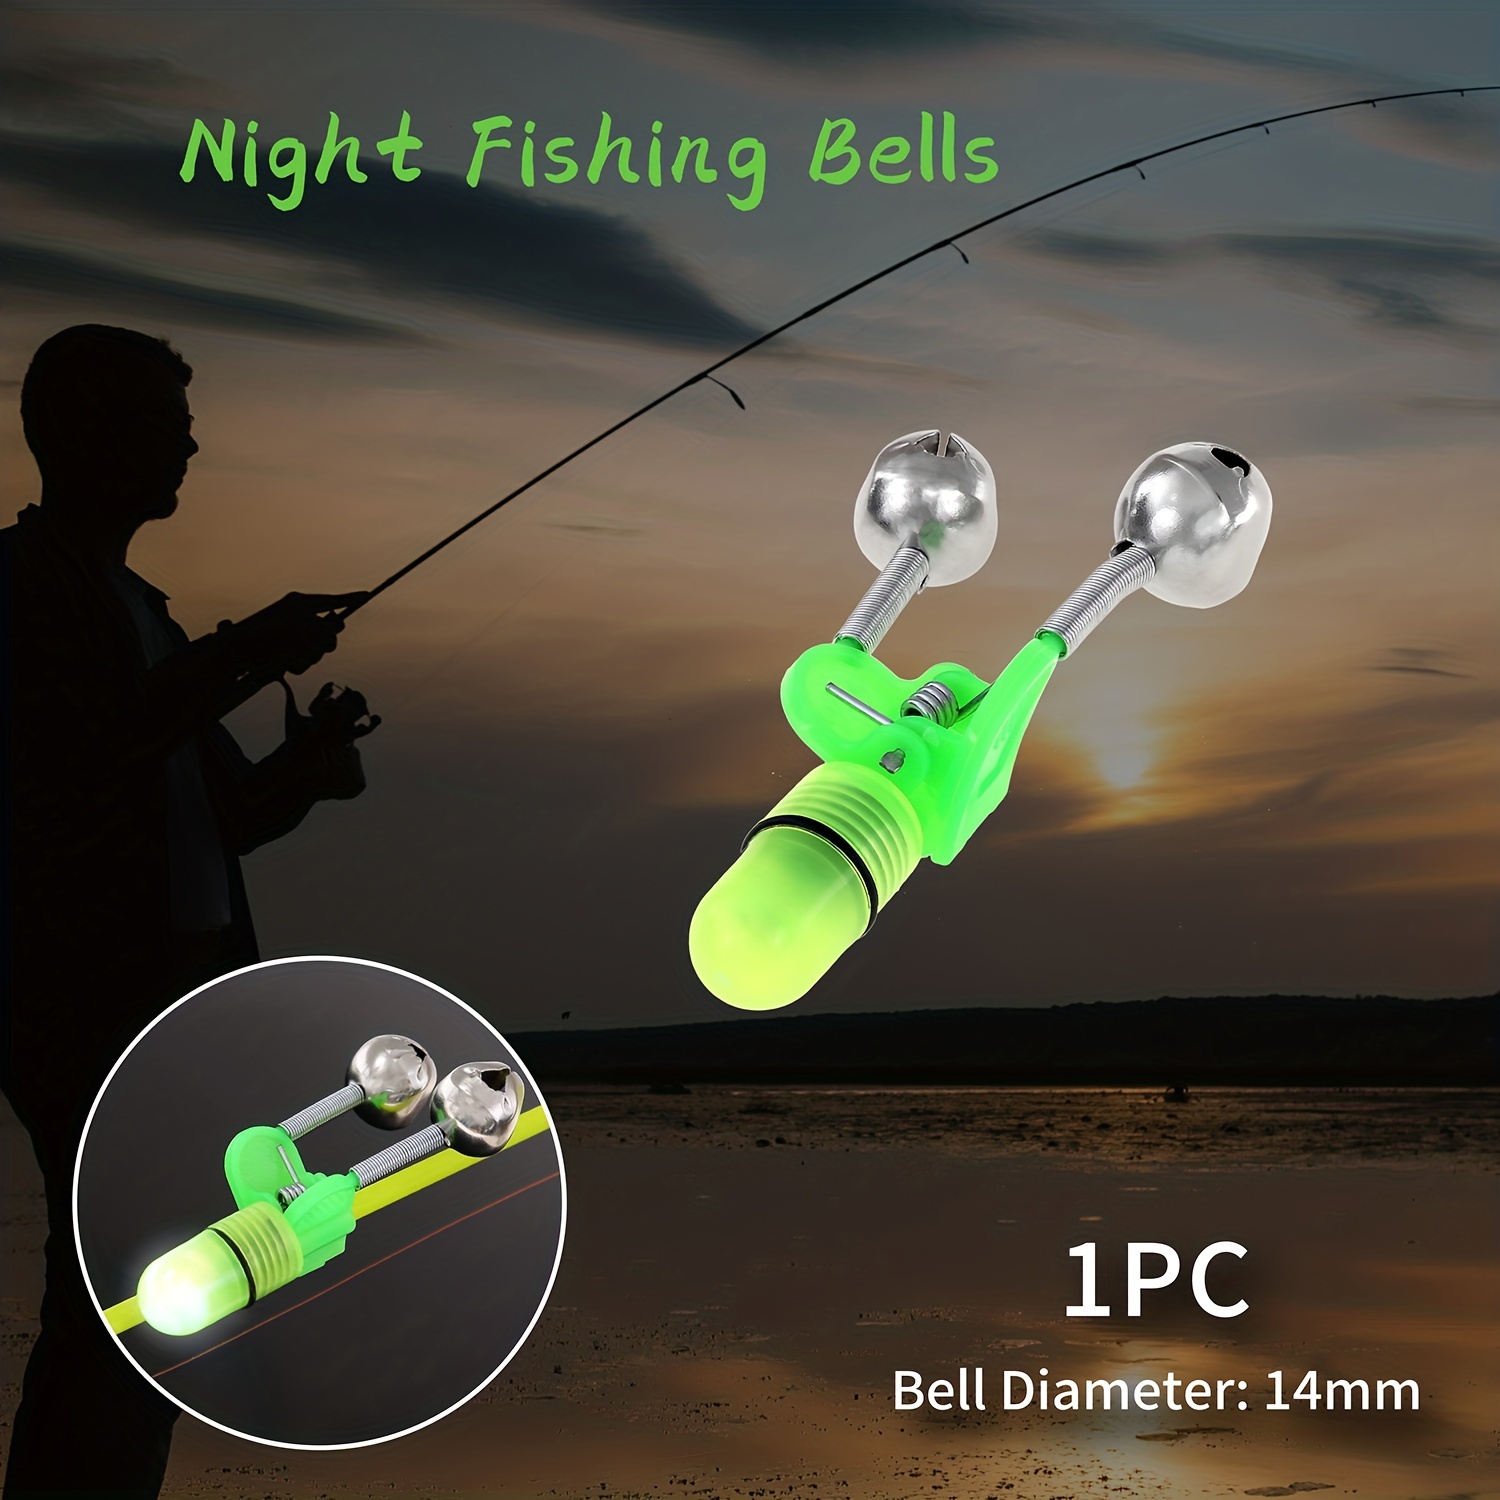 1pc Night Fishing Bite Alarm Bell Get The Hook Every Time, 54% OFF